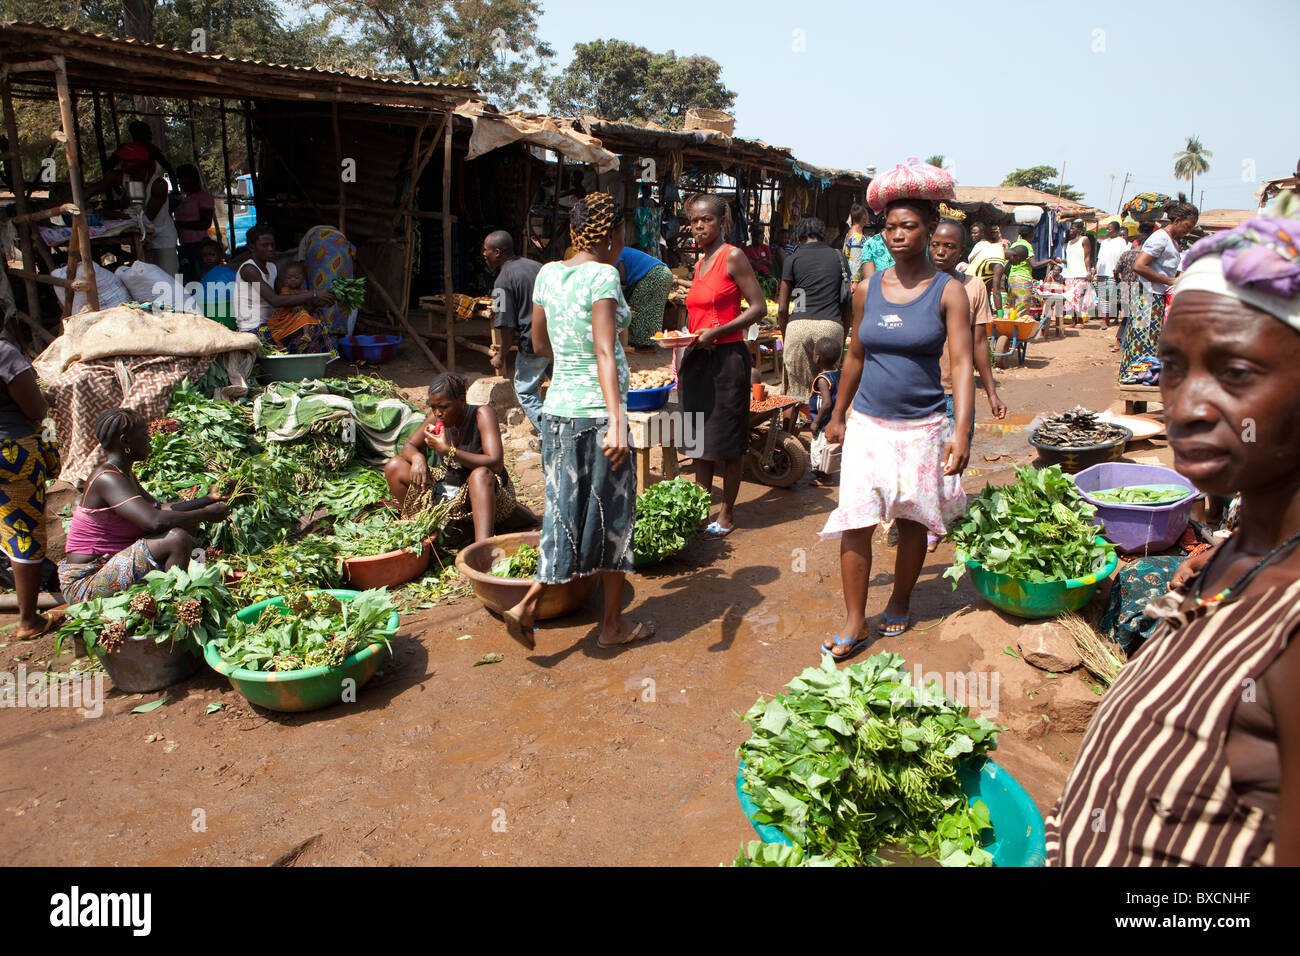 Shoppers walk through a crowded market in Freetown, Sierra Leone, West Africa. Stock Photo